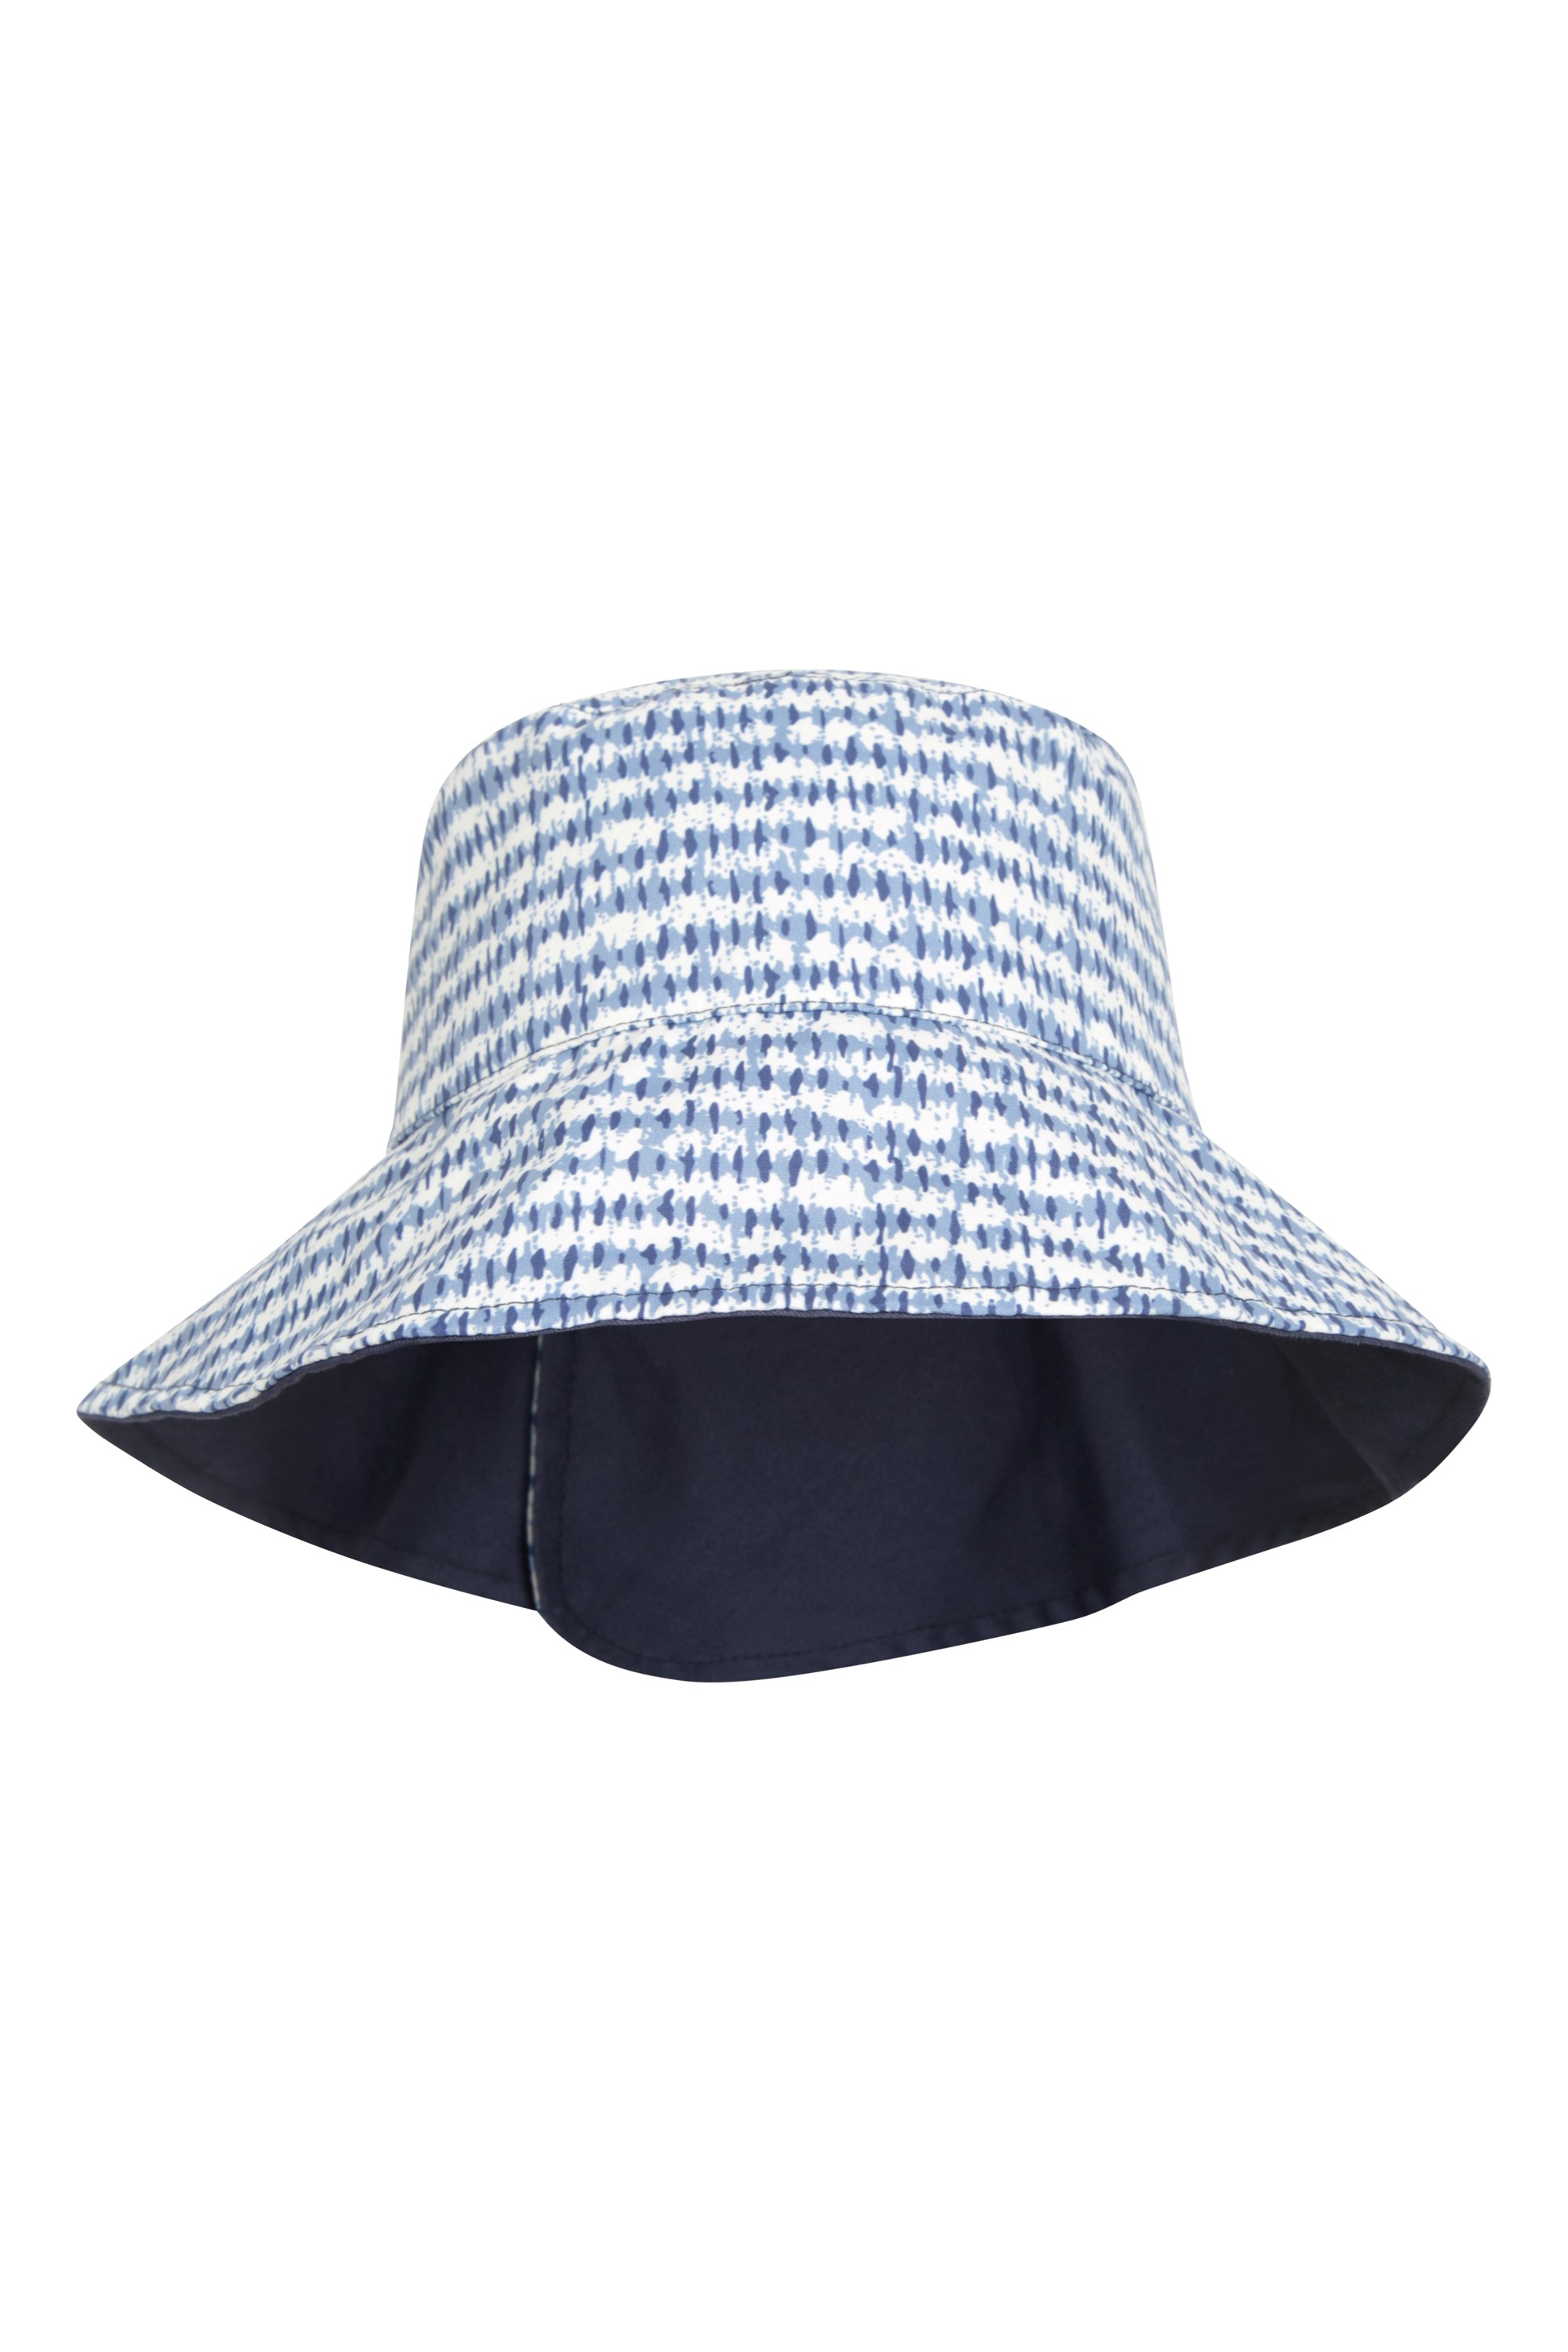 Mountain Warehouse Womens Packable Bucket Hat - Navy | Size One